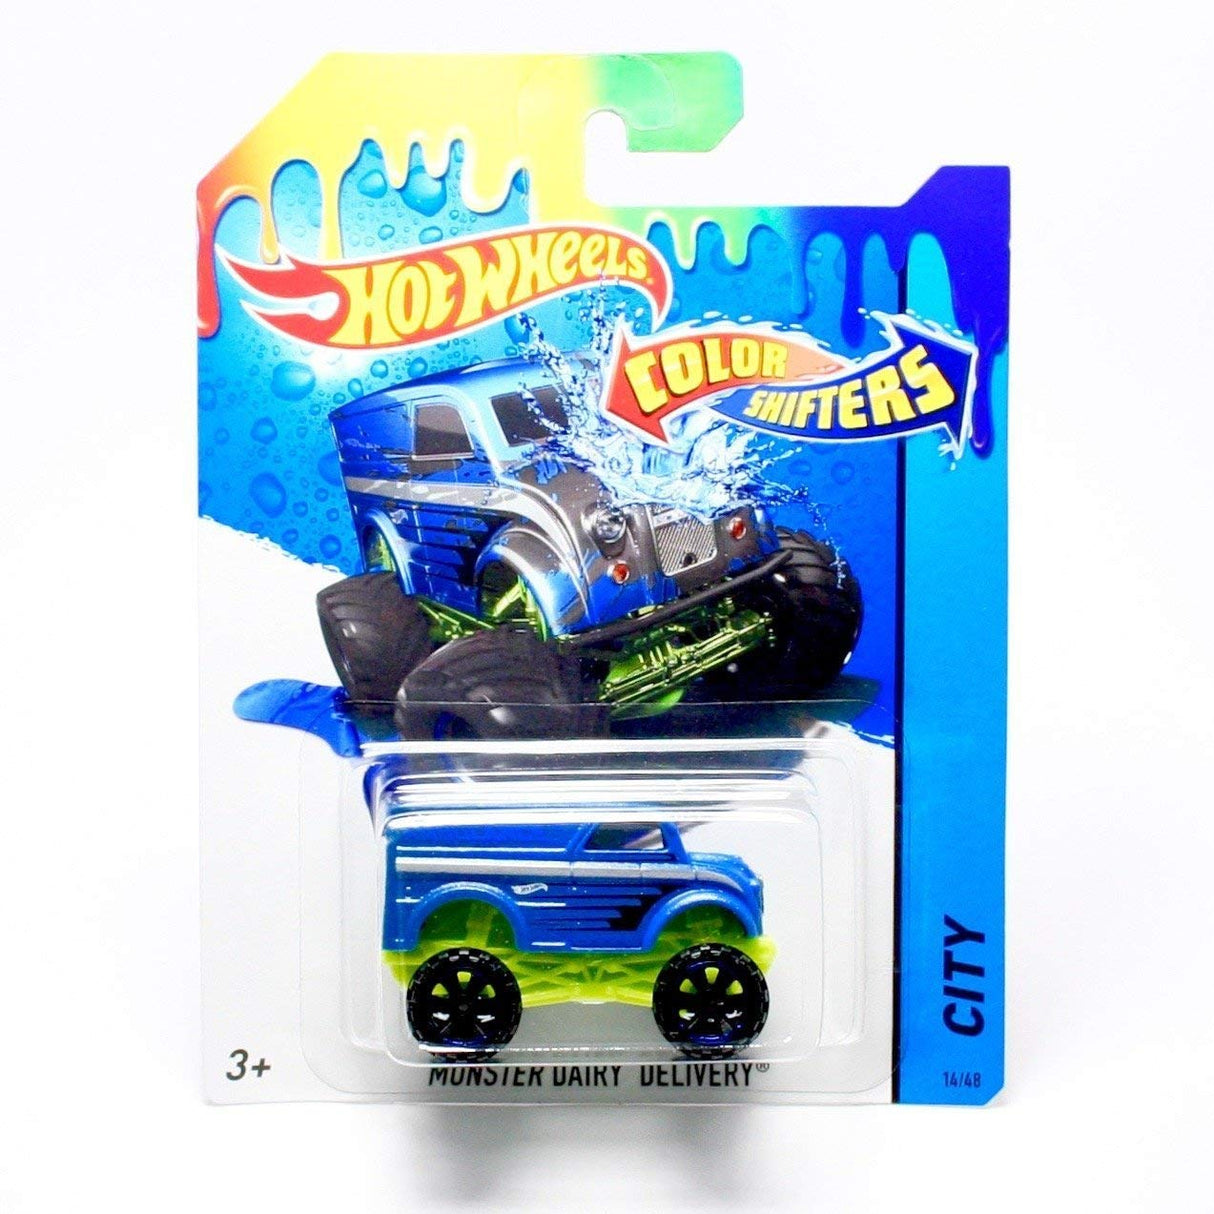 Hotwheels Color Shifters Moster Dairy Delivery